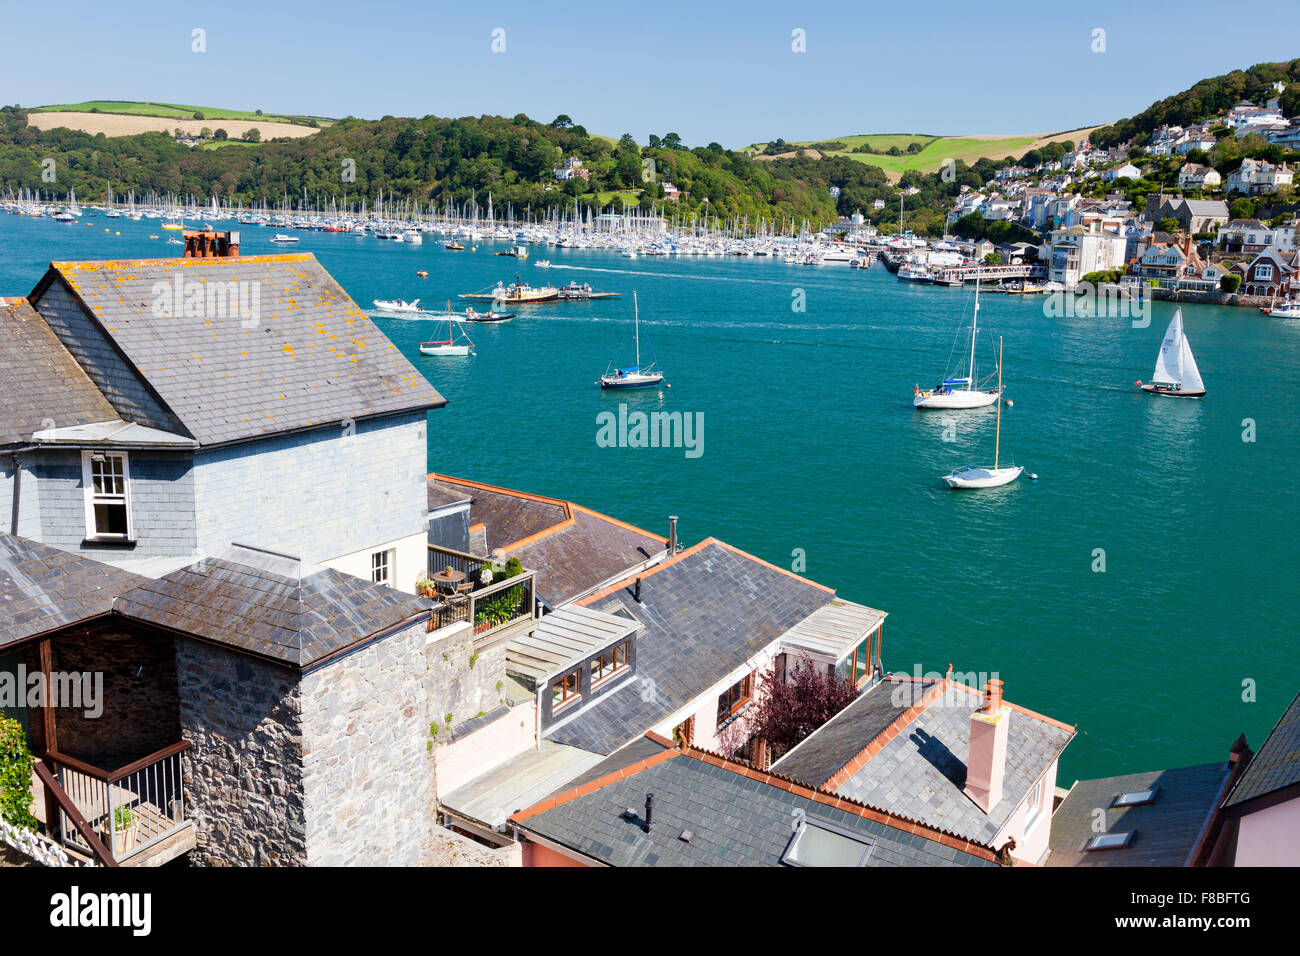 Looking out across the expensive waterfront houses on the River Dart towards Kingswear from Dartmouth, Devon, England, UK Stock Photo